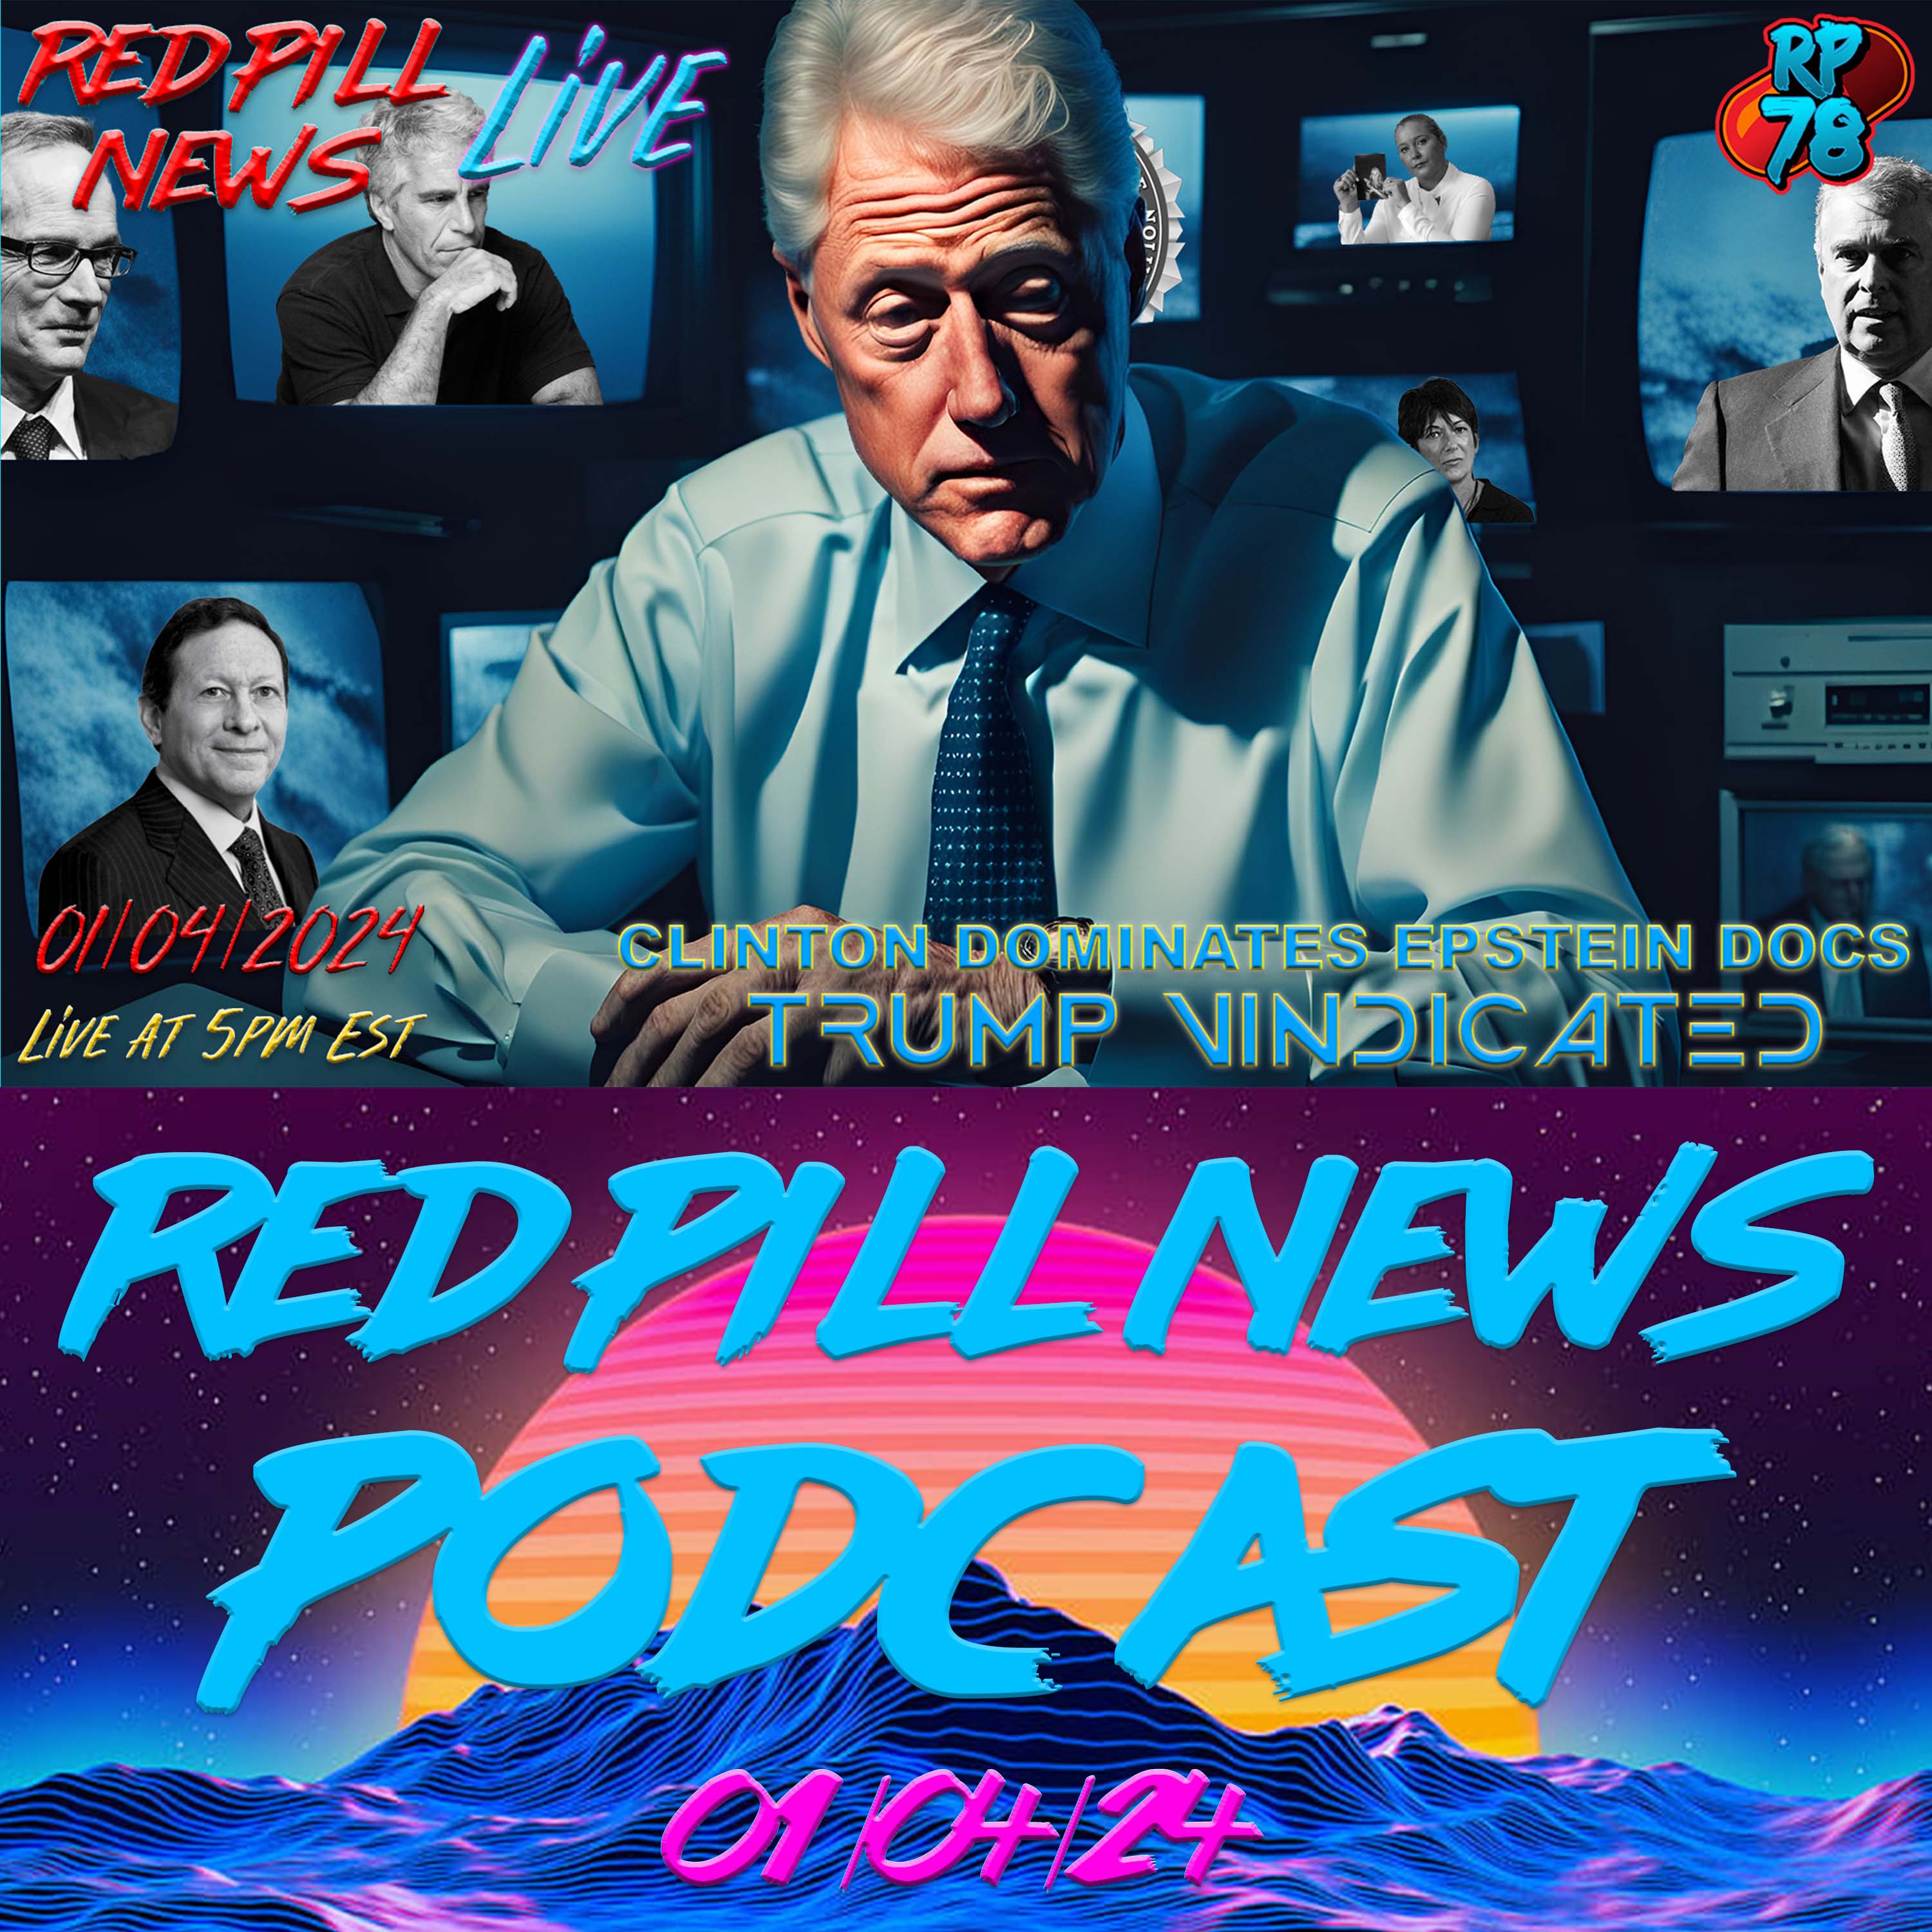 Epstein Drops Begin: Clinton Dominates & Trump Vindicated on Red Pill News Live